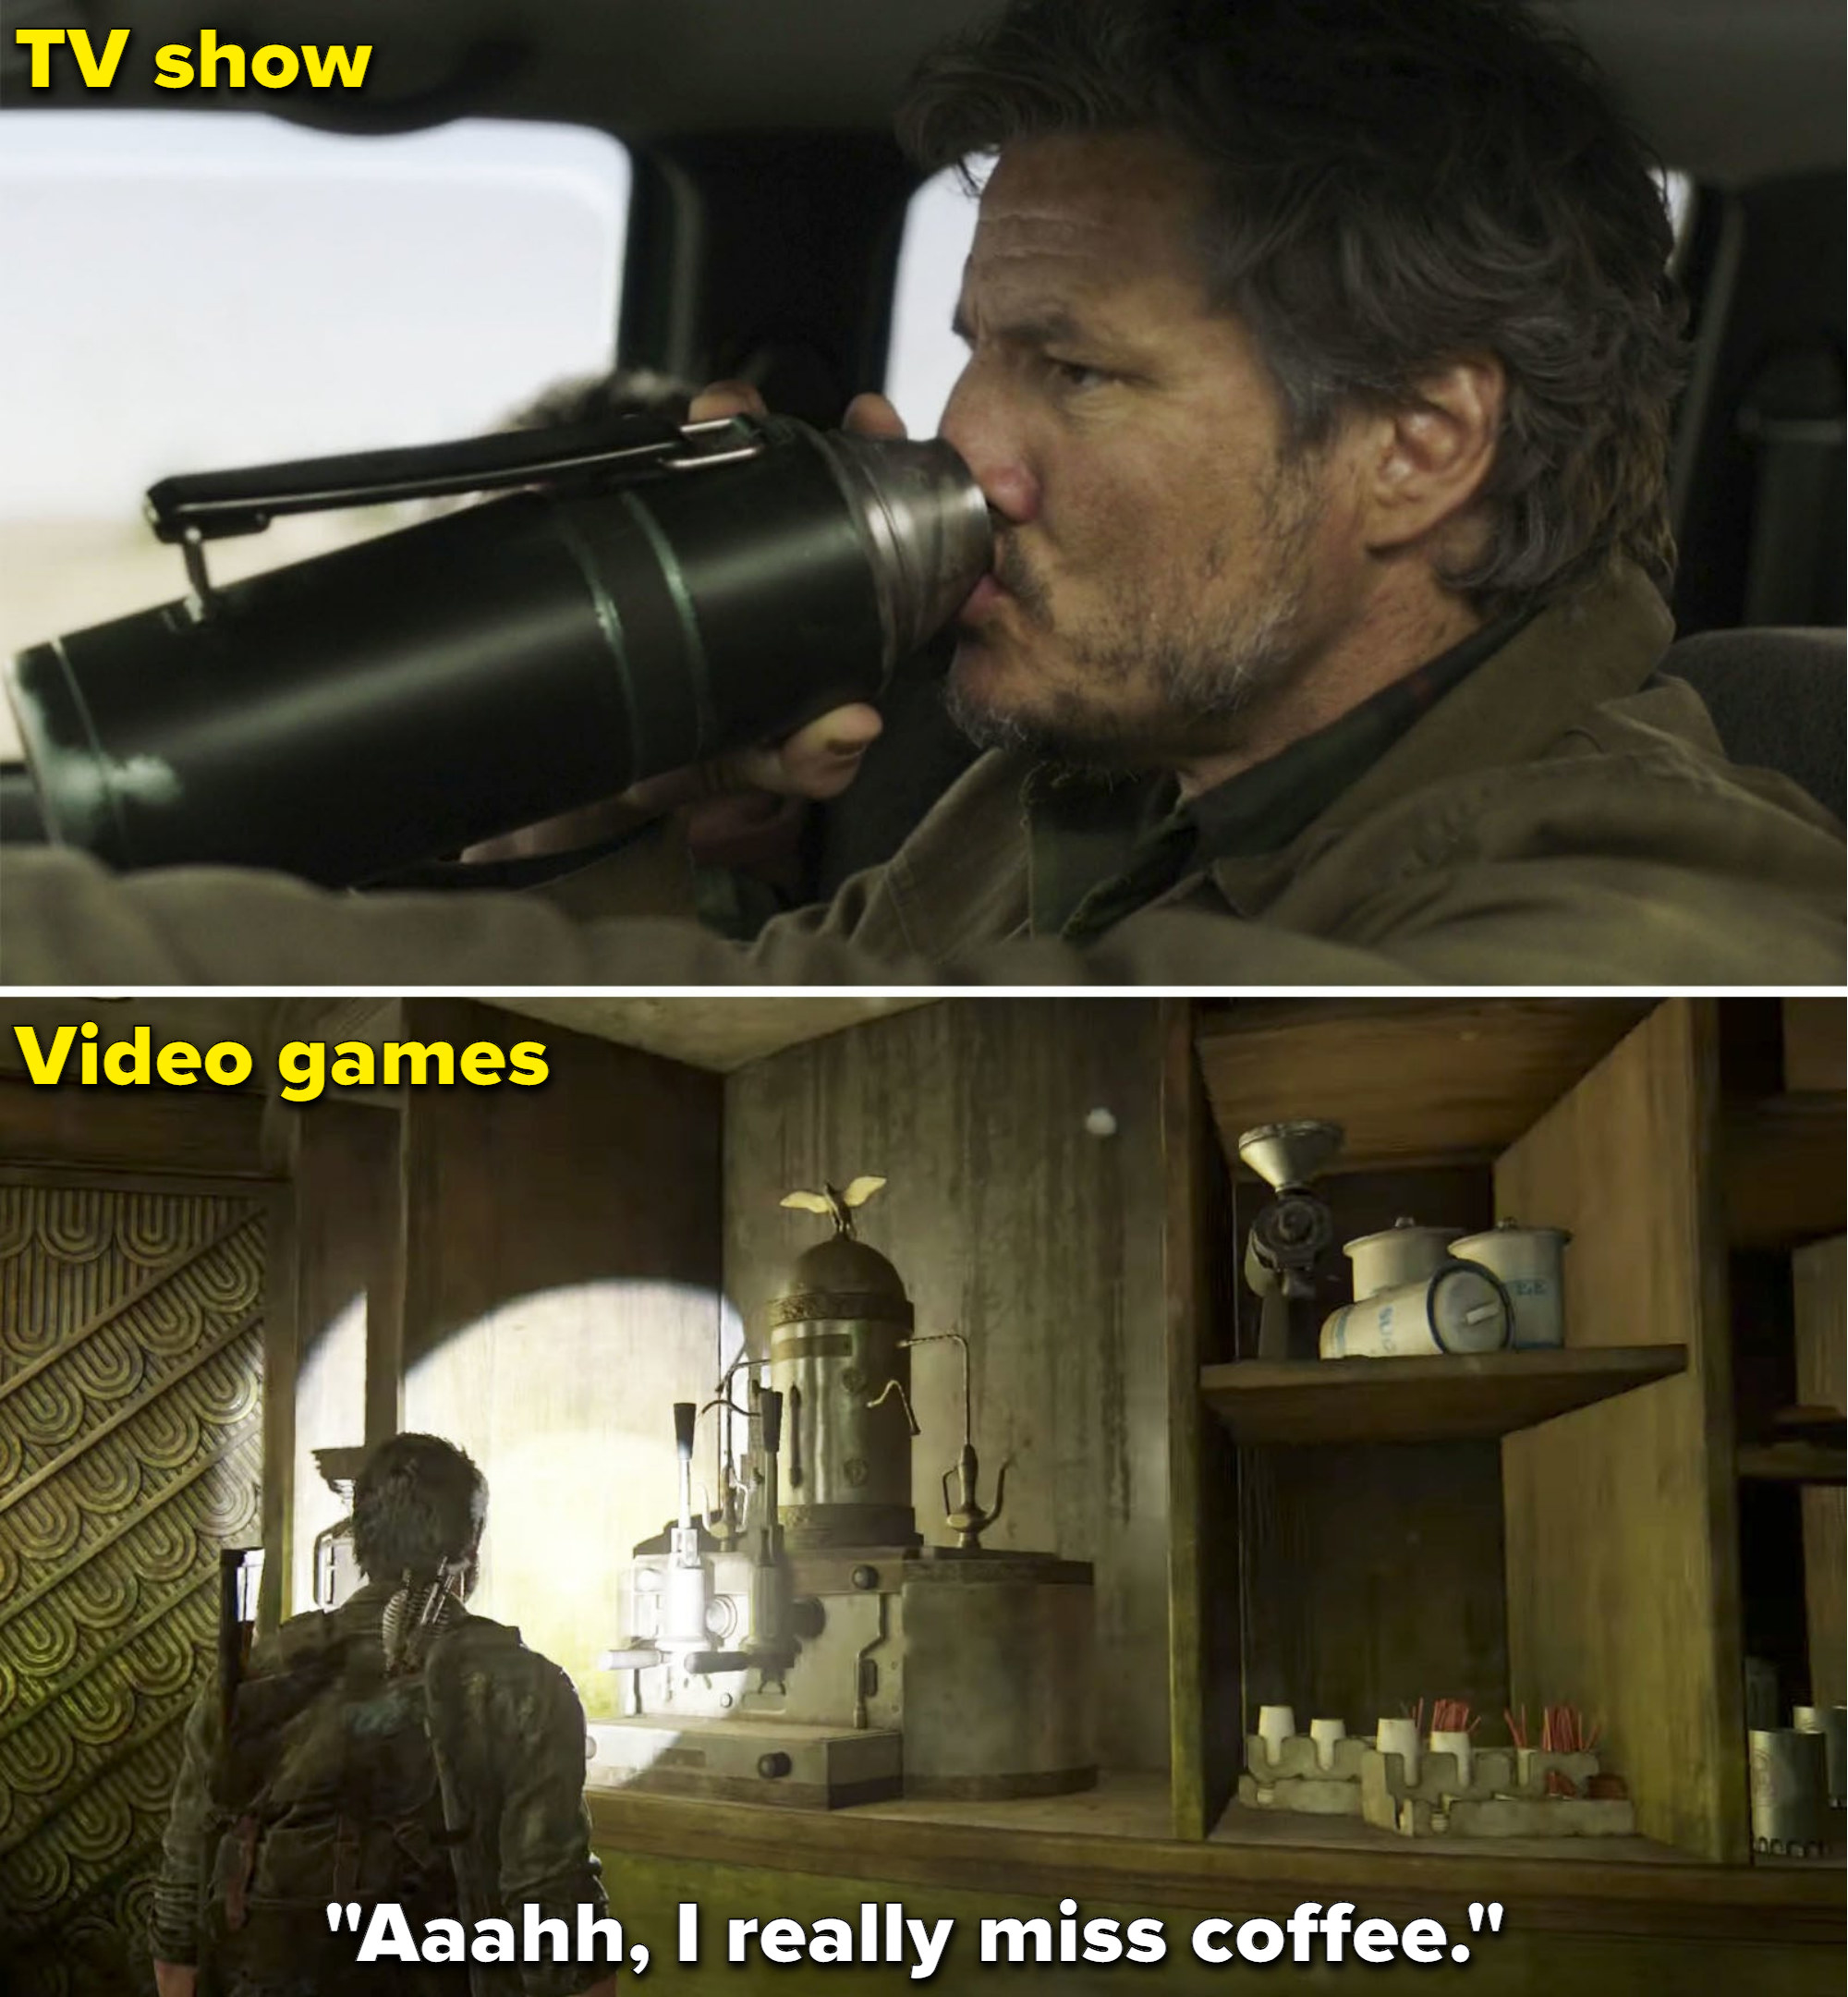 Joel drinking coffee in the show vs Joel saying he misses coffee in the game